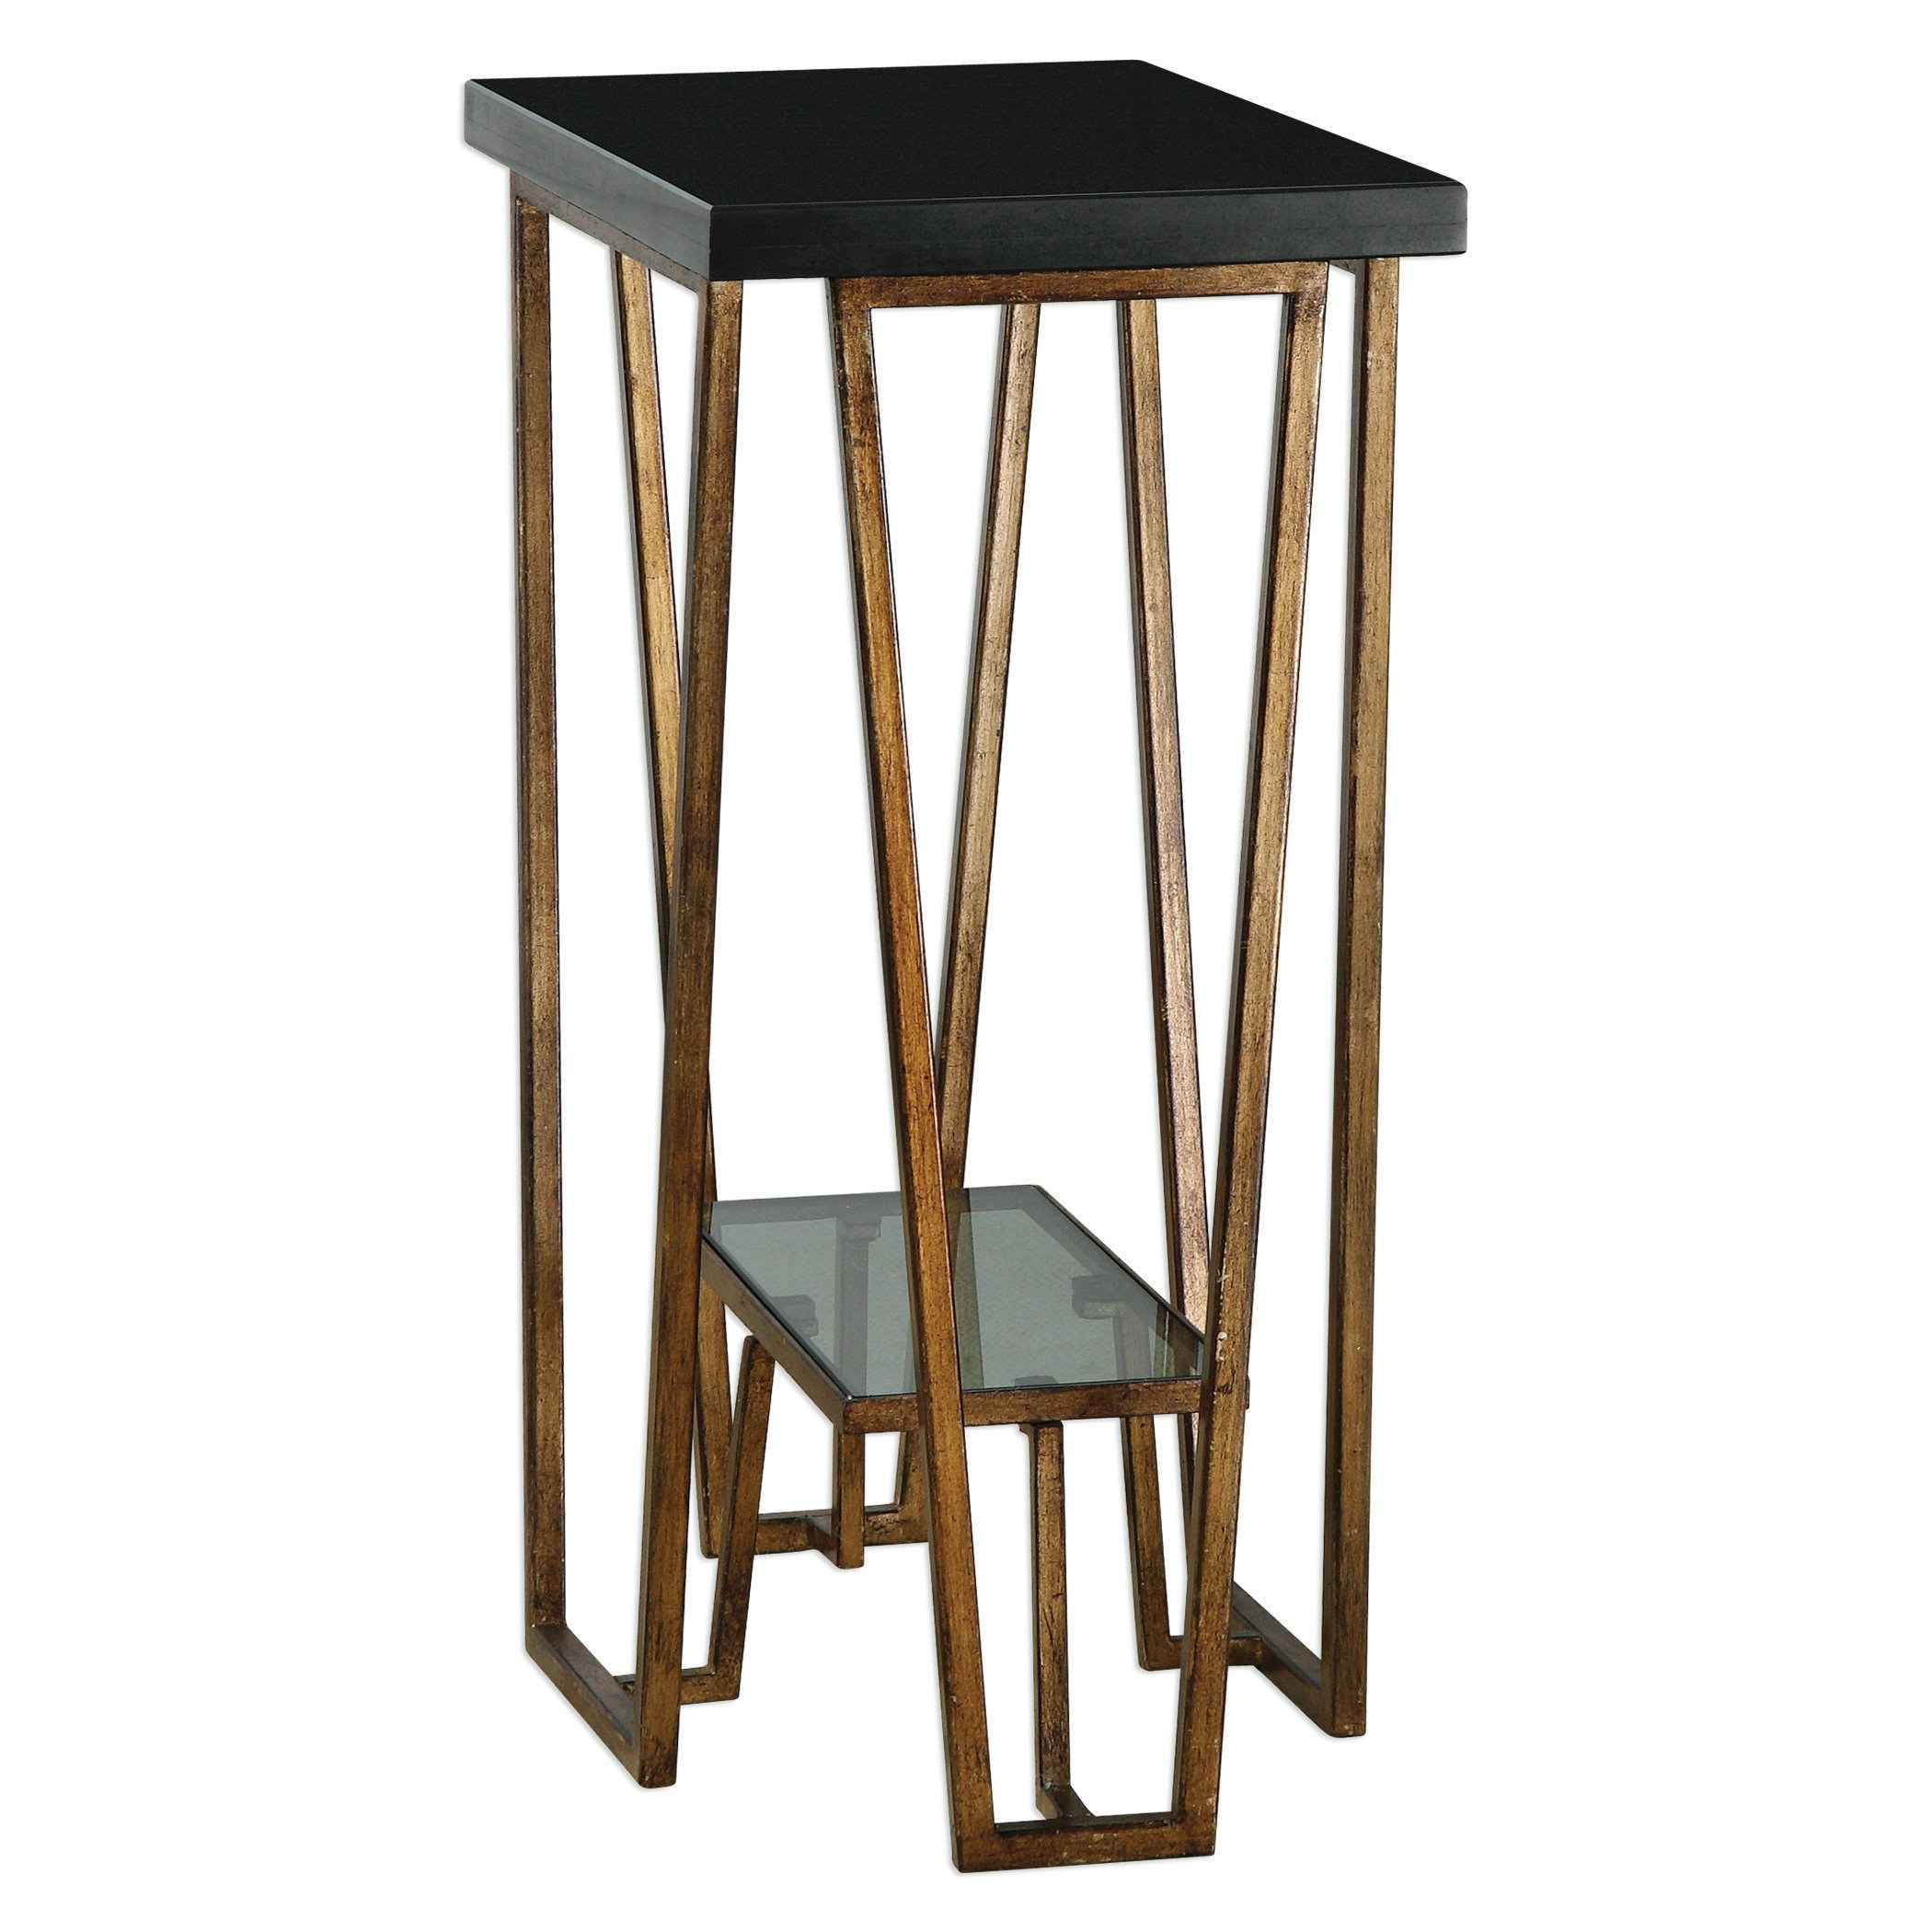 uttermost agnes black granite accent table free shipping rubati today wooden trestle piece chair set market umbrella stand allen cocktail pottery barn chairs homemade coffee plans